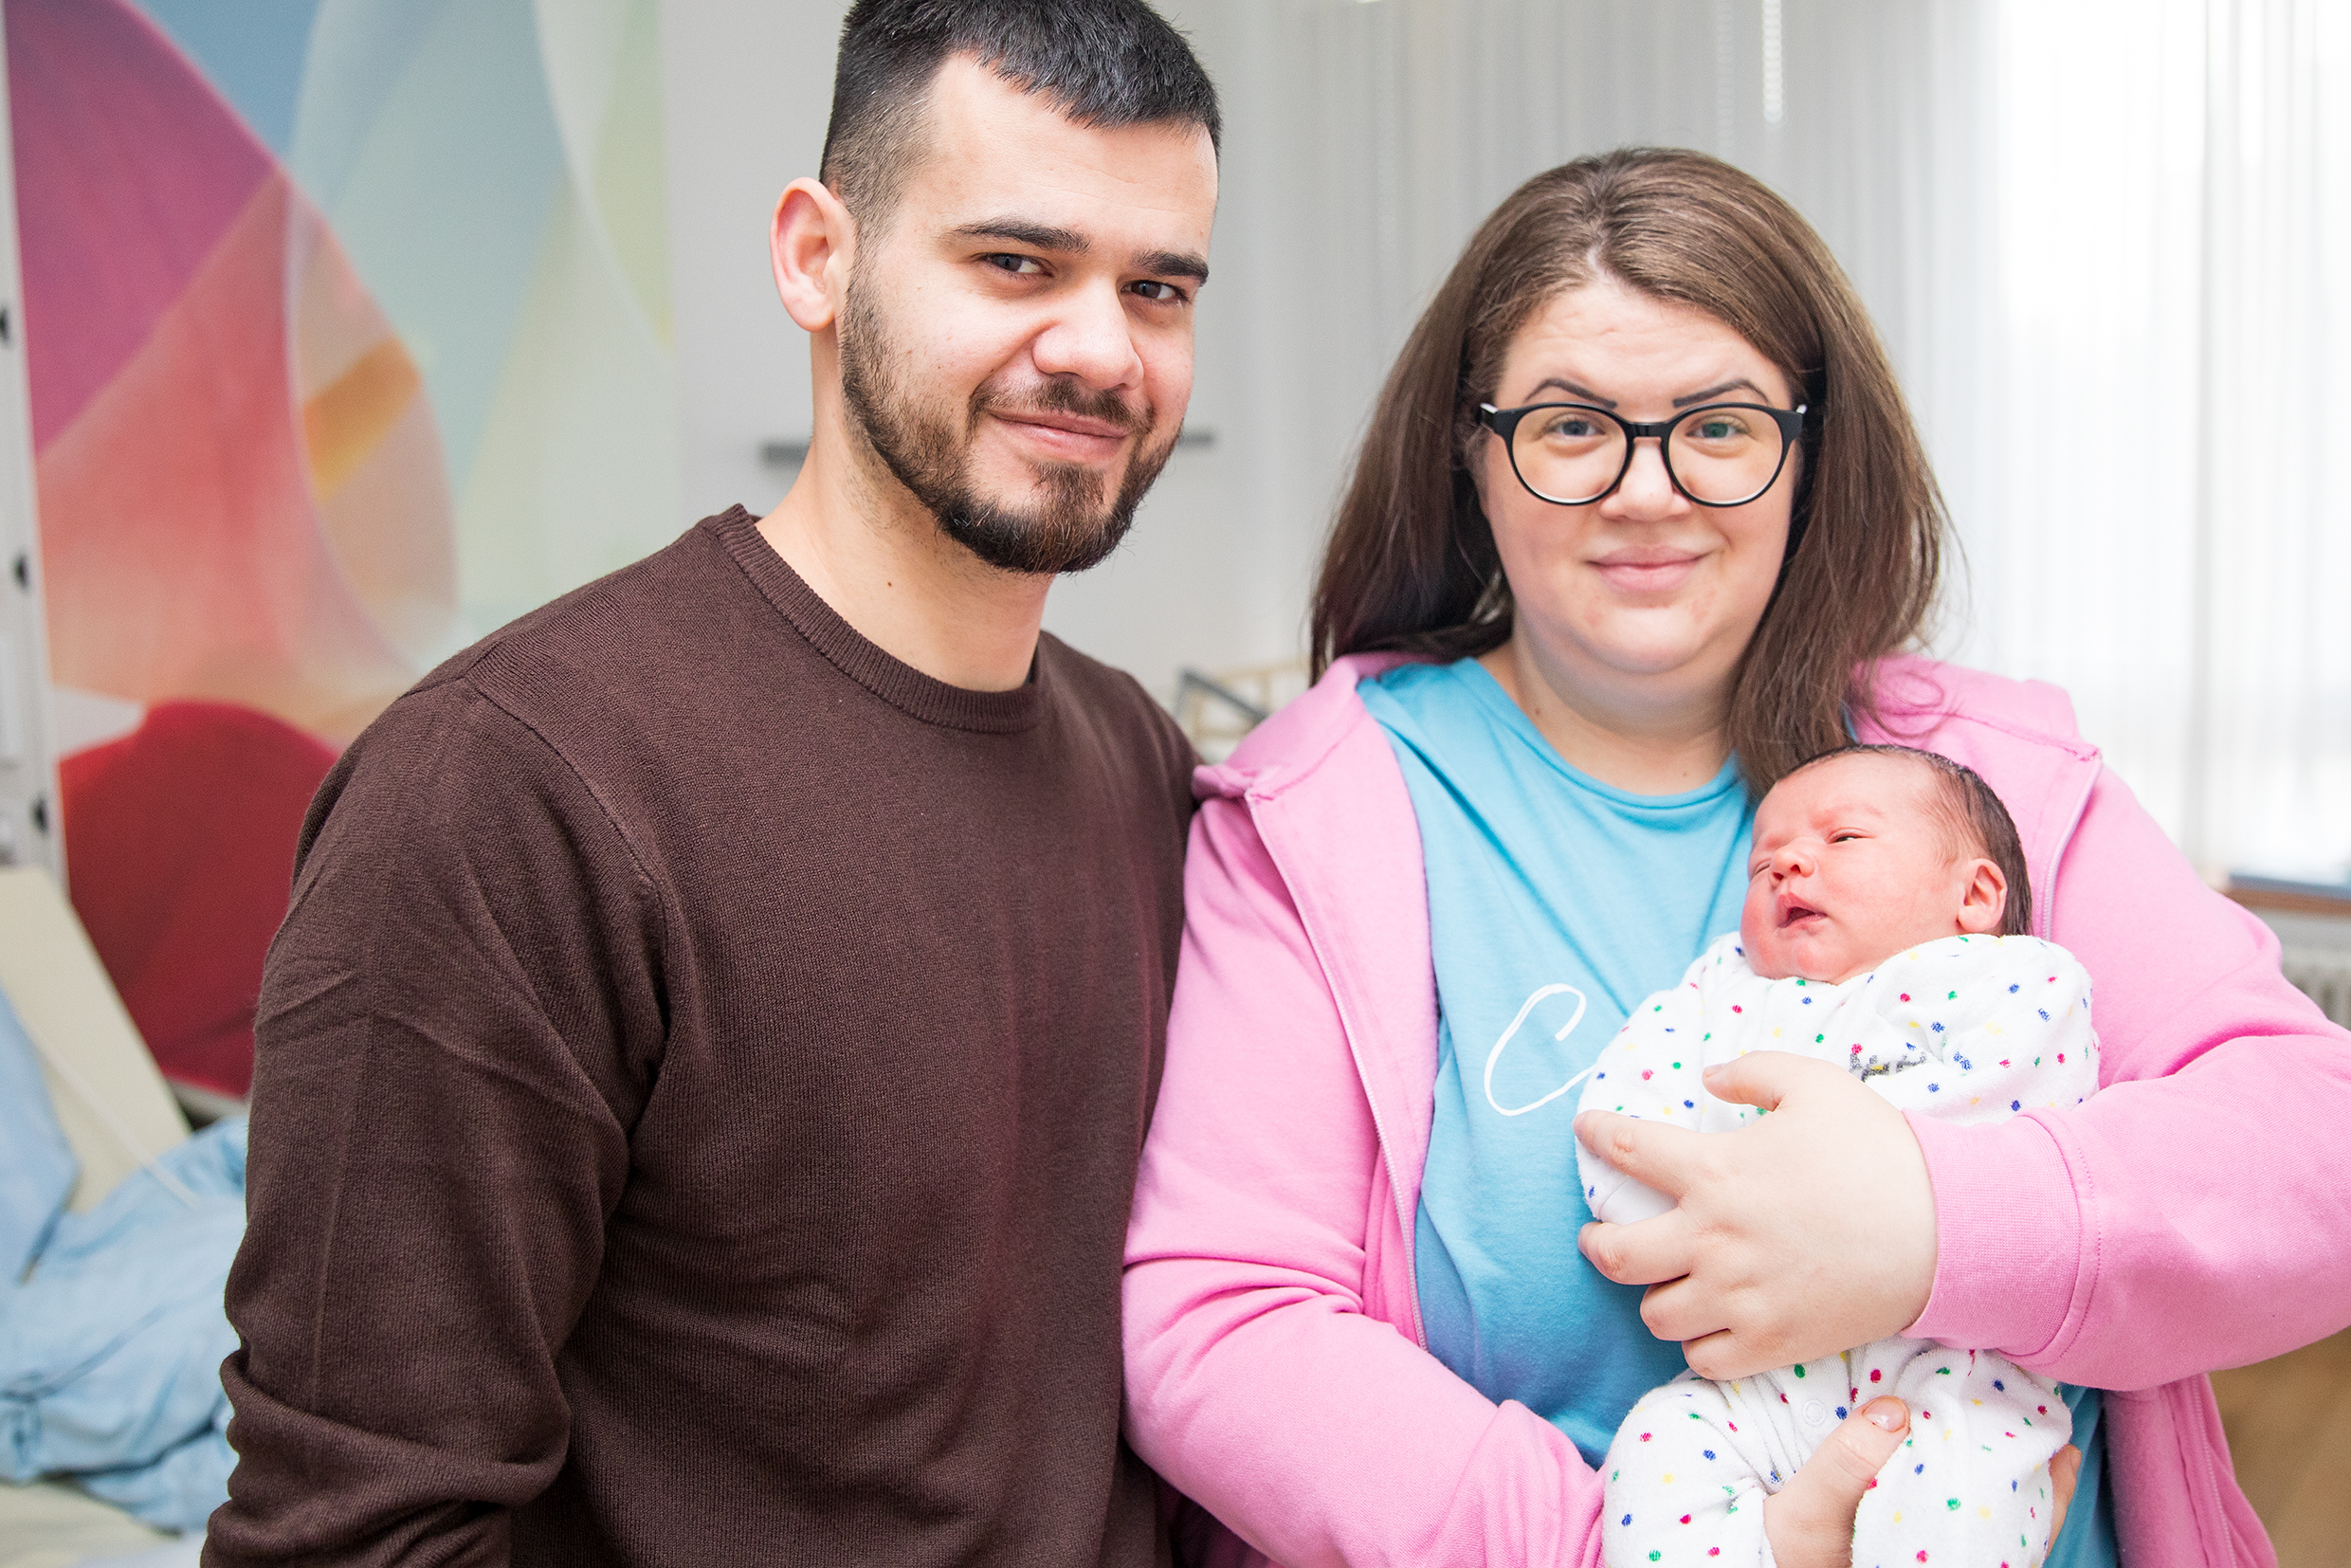 The parents Bogdan and Mihaela-Florina M., the mother holds the newborn Luca in her arms.